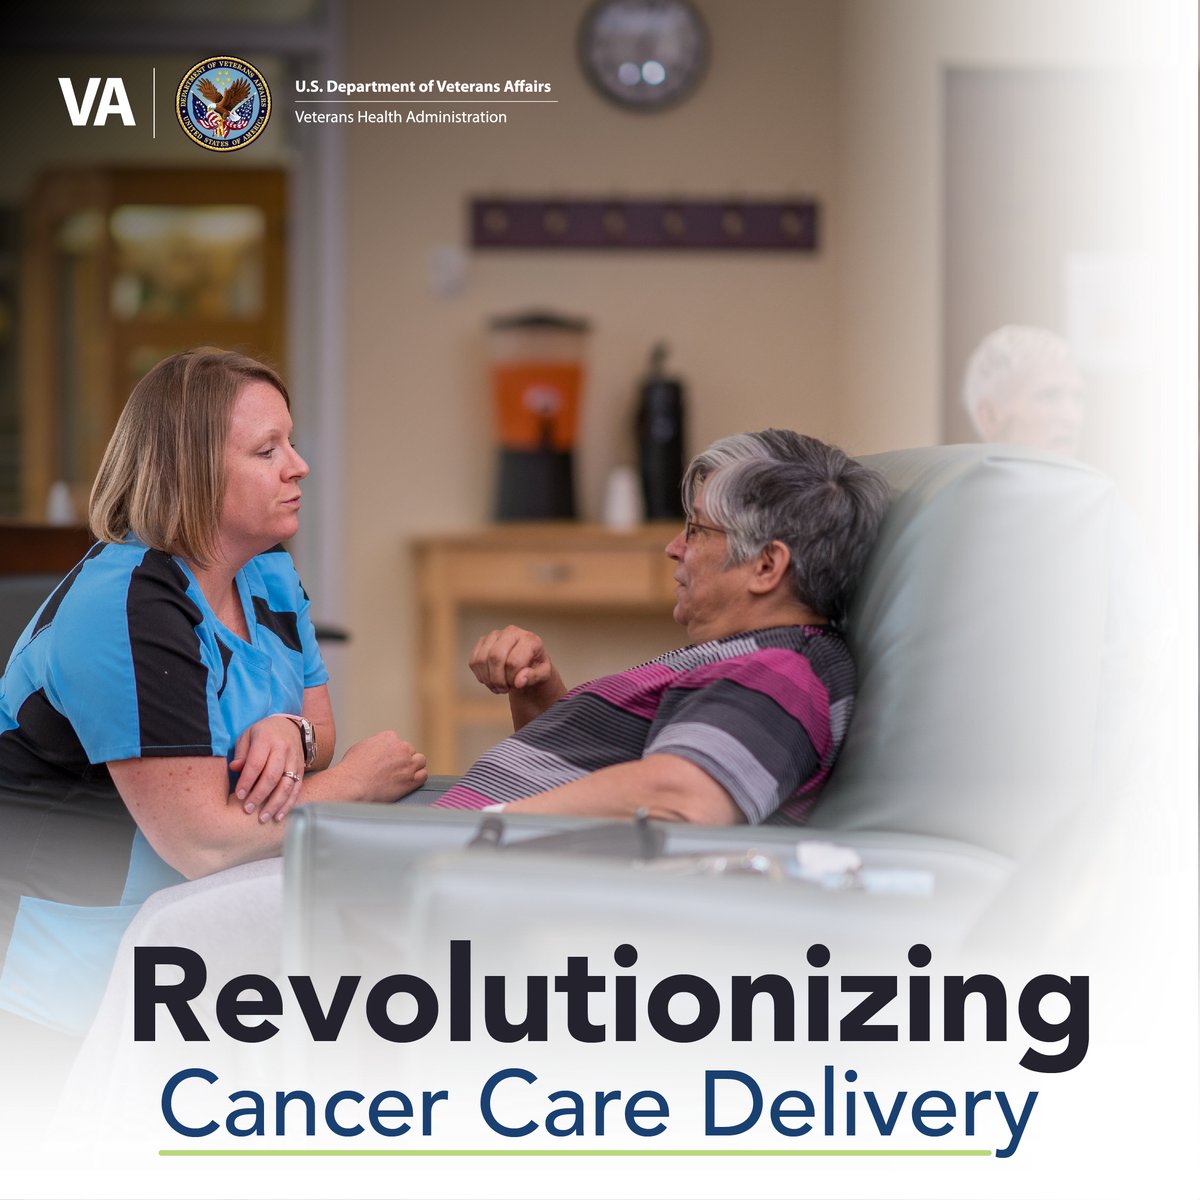 We are expanding our groundbreaking Close to Me Cancer Care service, aiming to bring cancer treatment closer to Veterans in their communities with an additional 30 locations by end of 2025.
cancer.va.gov/oncology-servi…

#BidenCancerMoonshot #VAClosetoMe